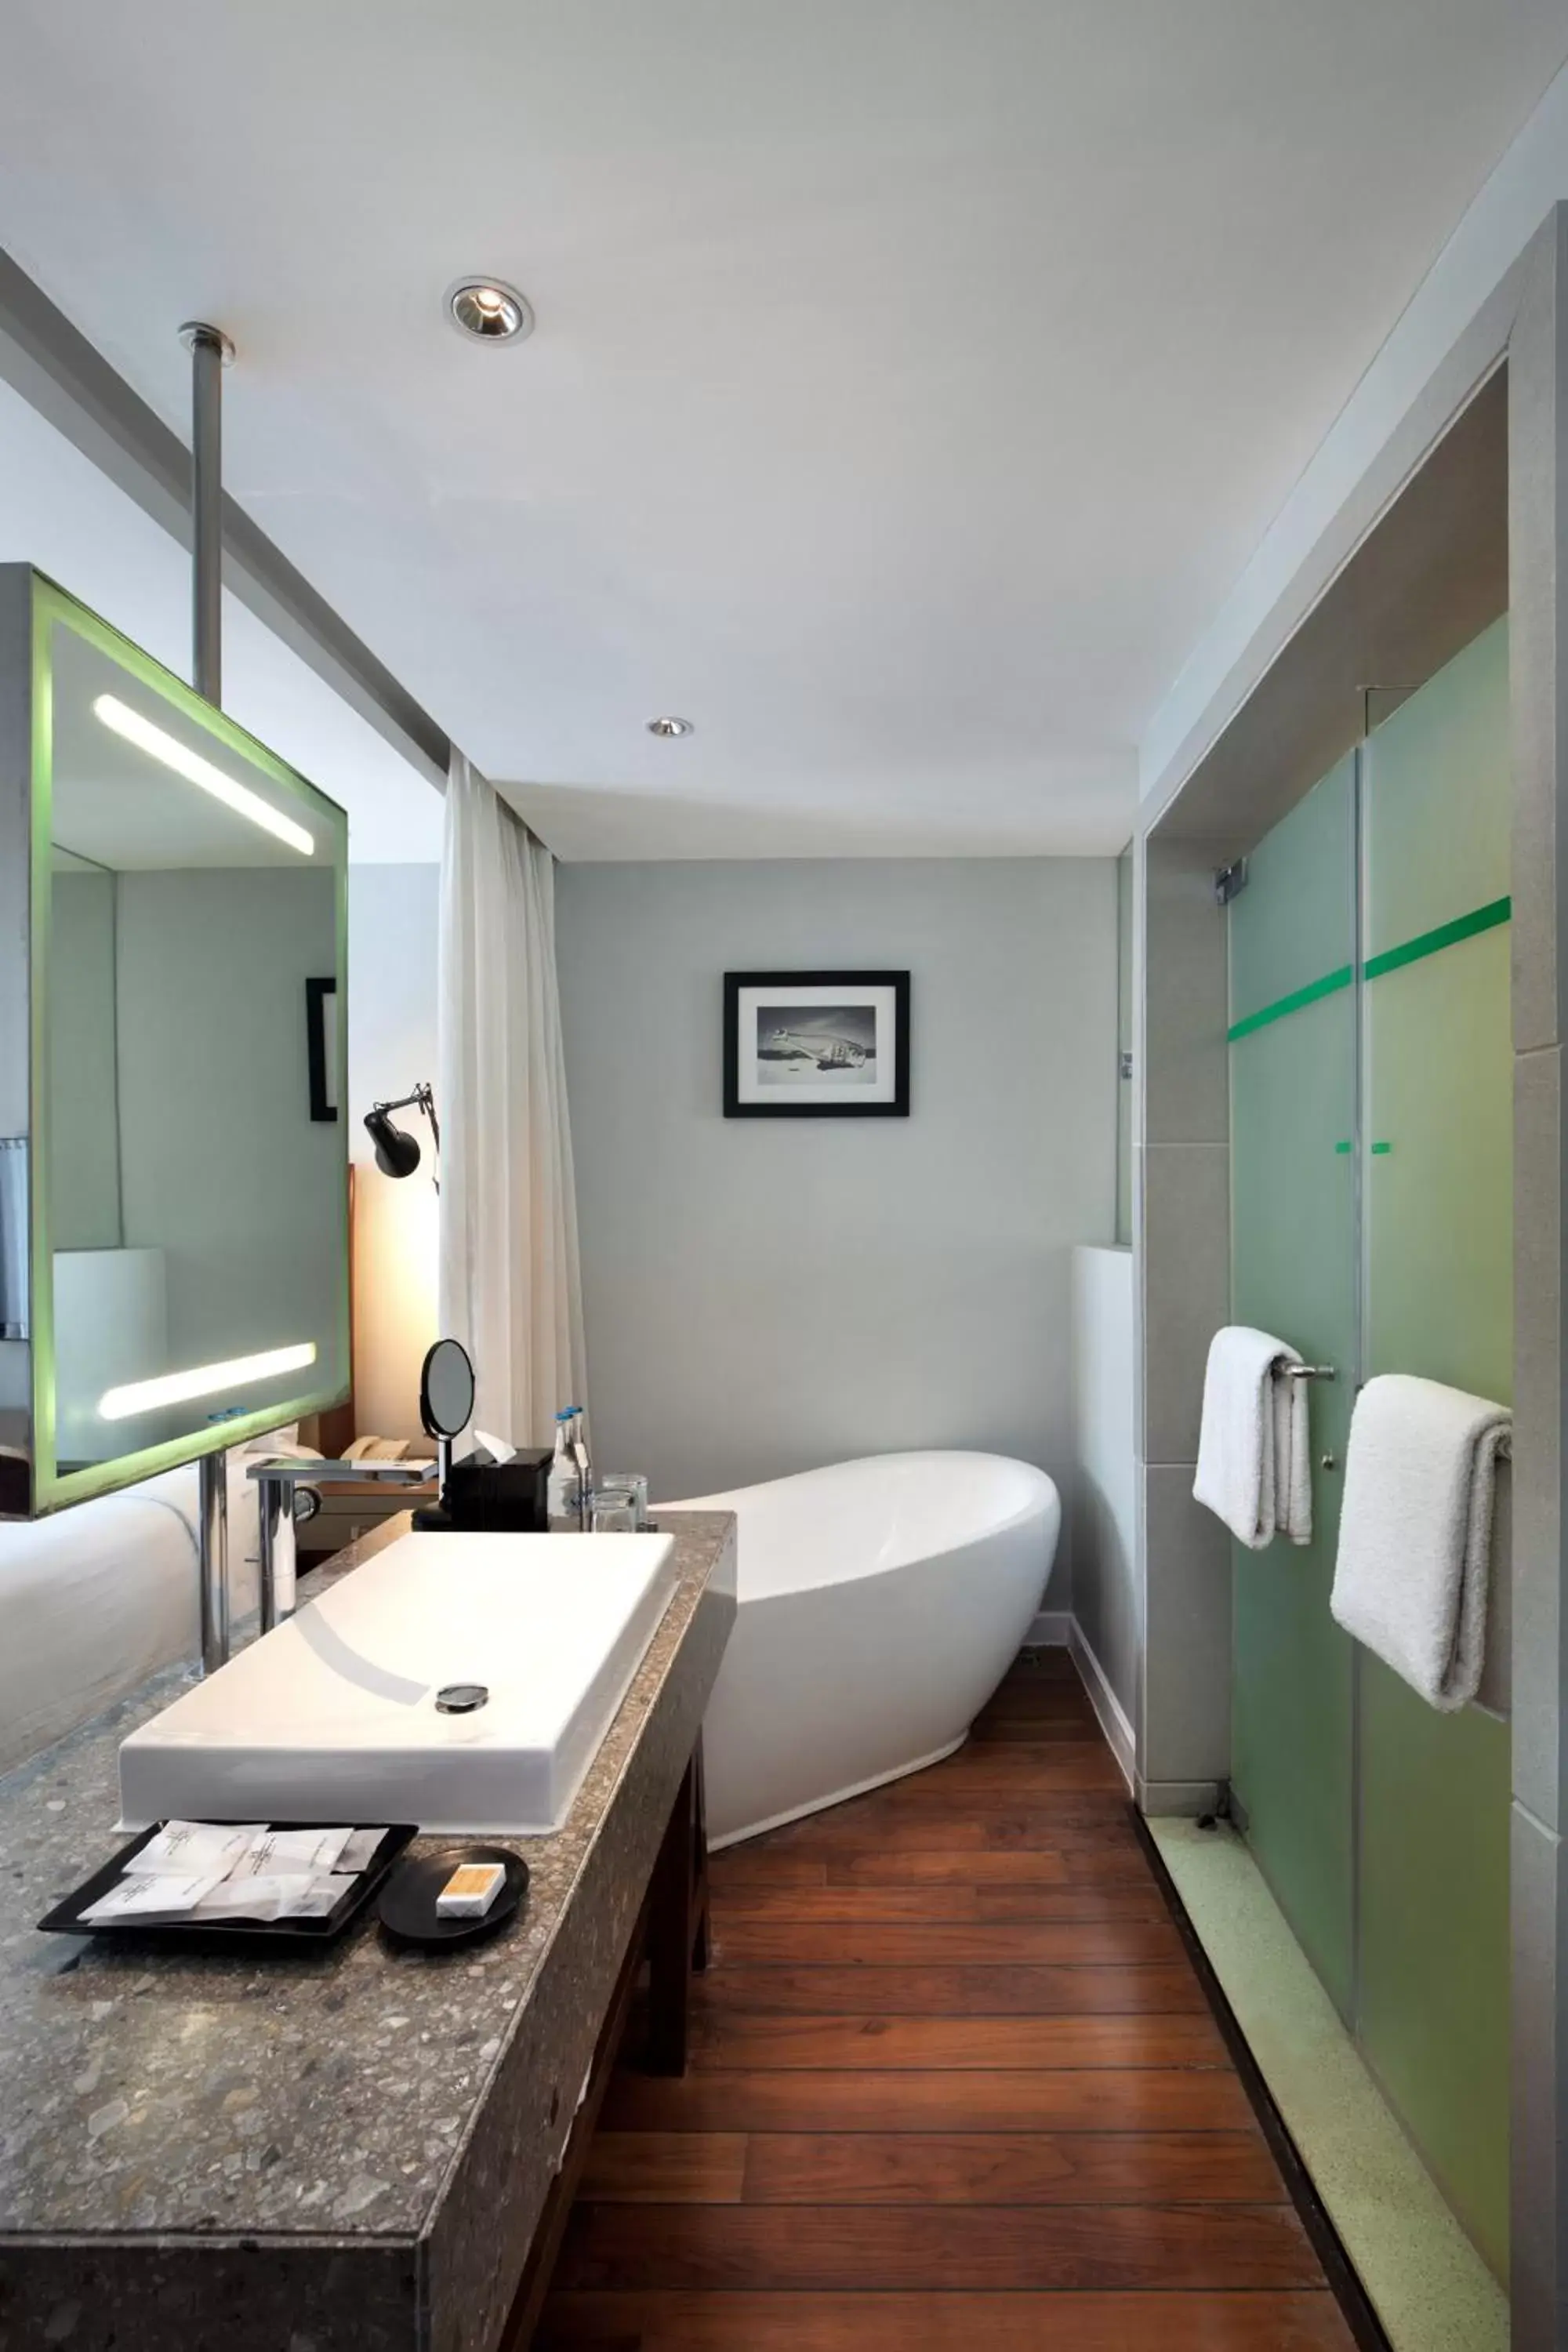 Bathroom in The Kuta Beach Heritage Hotel - Managed by Accor